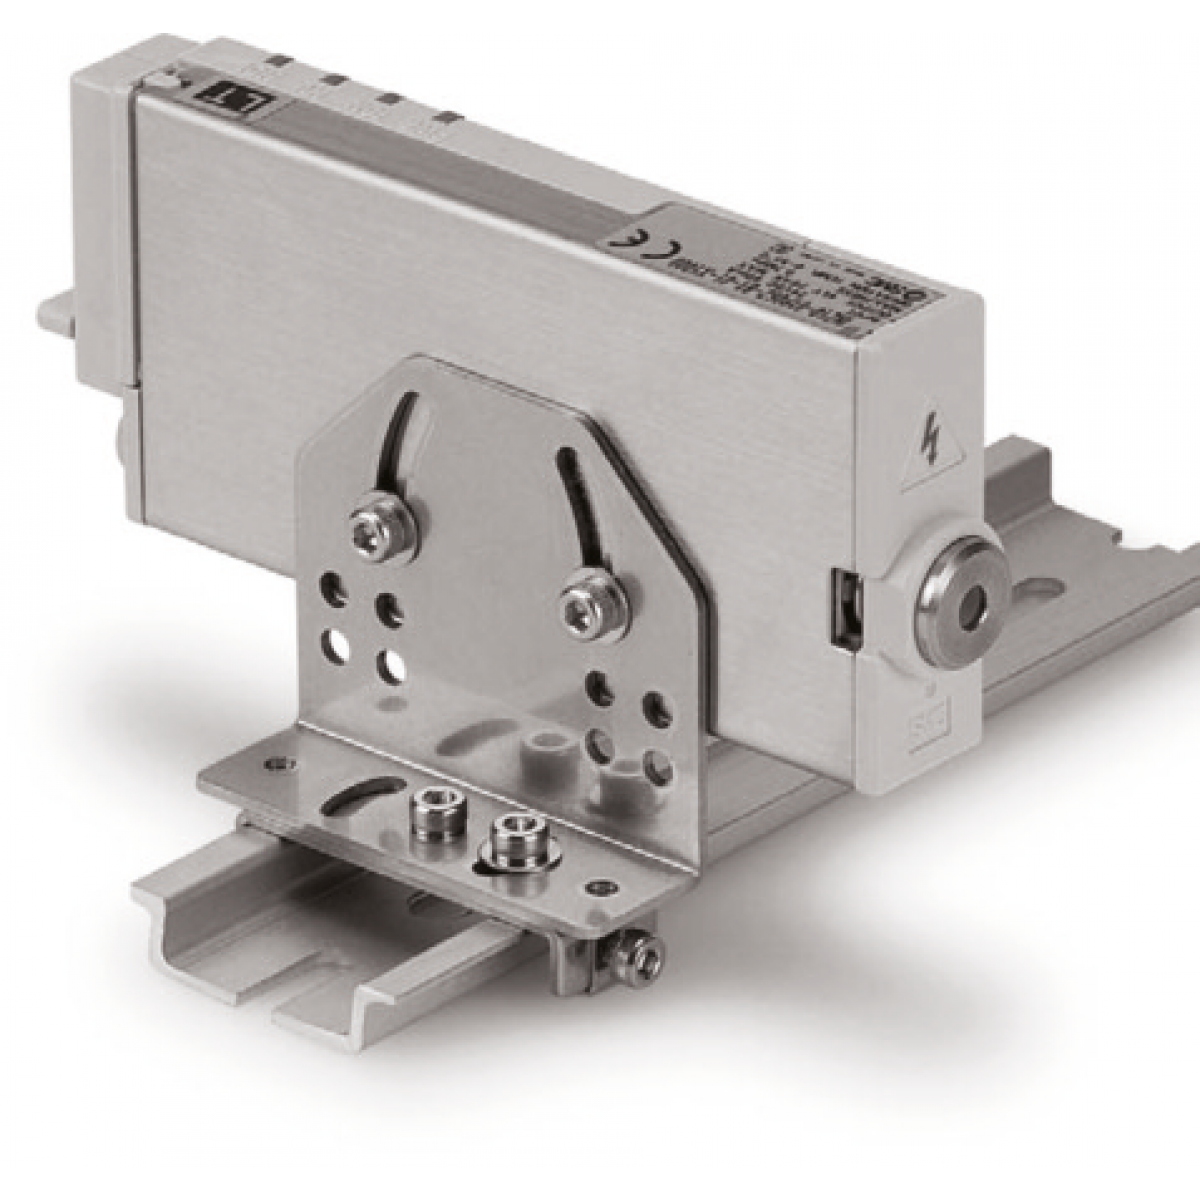 Description:with DIN rail mounting kit